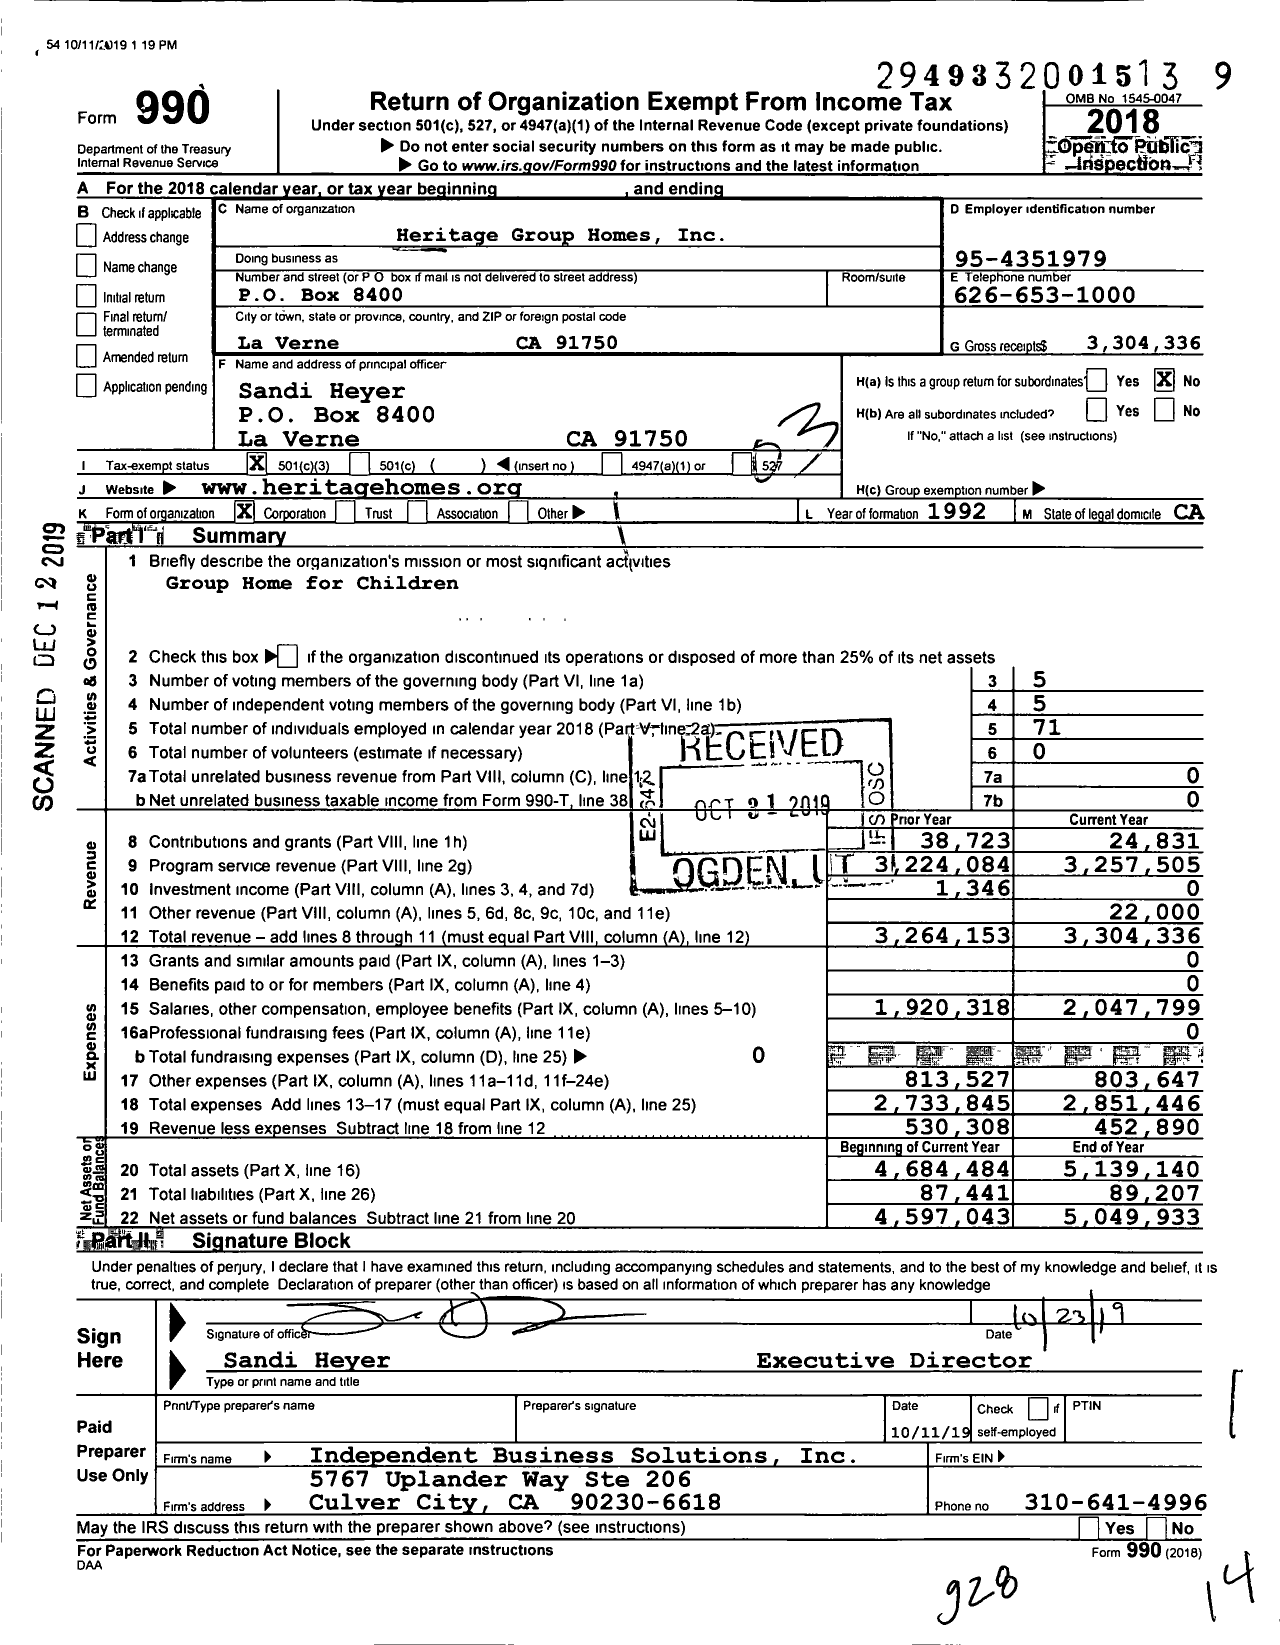 Image of first page of 2018 Form 990 for Heritage Group Homes